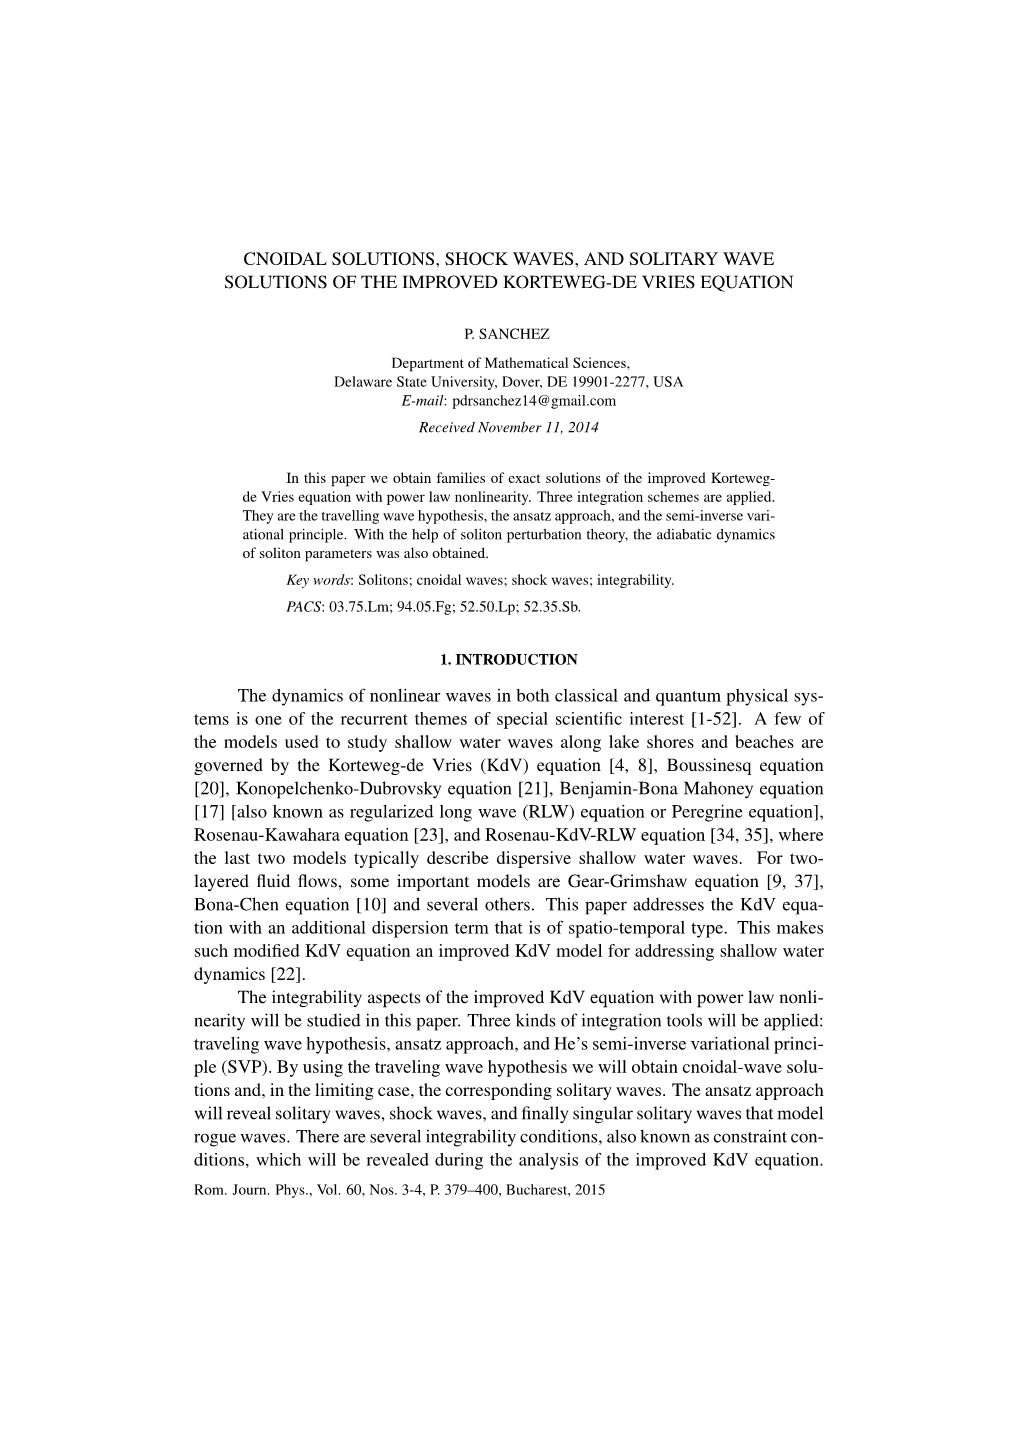 Cnoidal Solutions, Shock Waves, and Solitary Wave Solutions of the Improved Korteweg-De Vries Equation